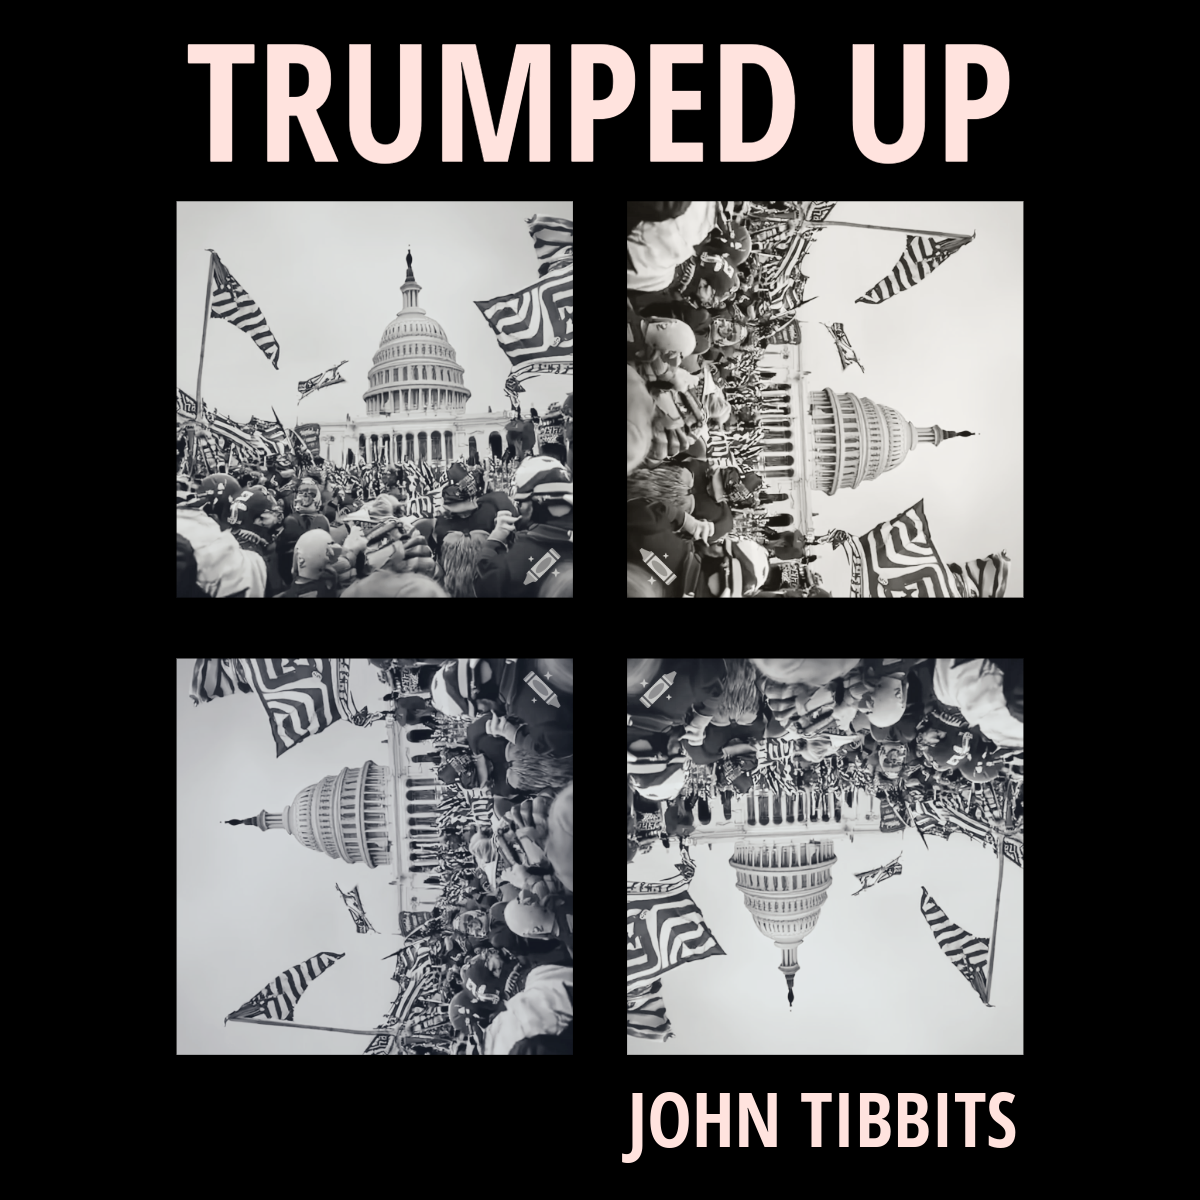 John Tibbits Takes Aim At Modern Demagoguery in New Single, 'Trumped Up'